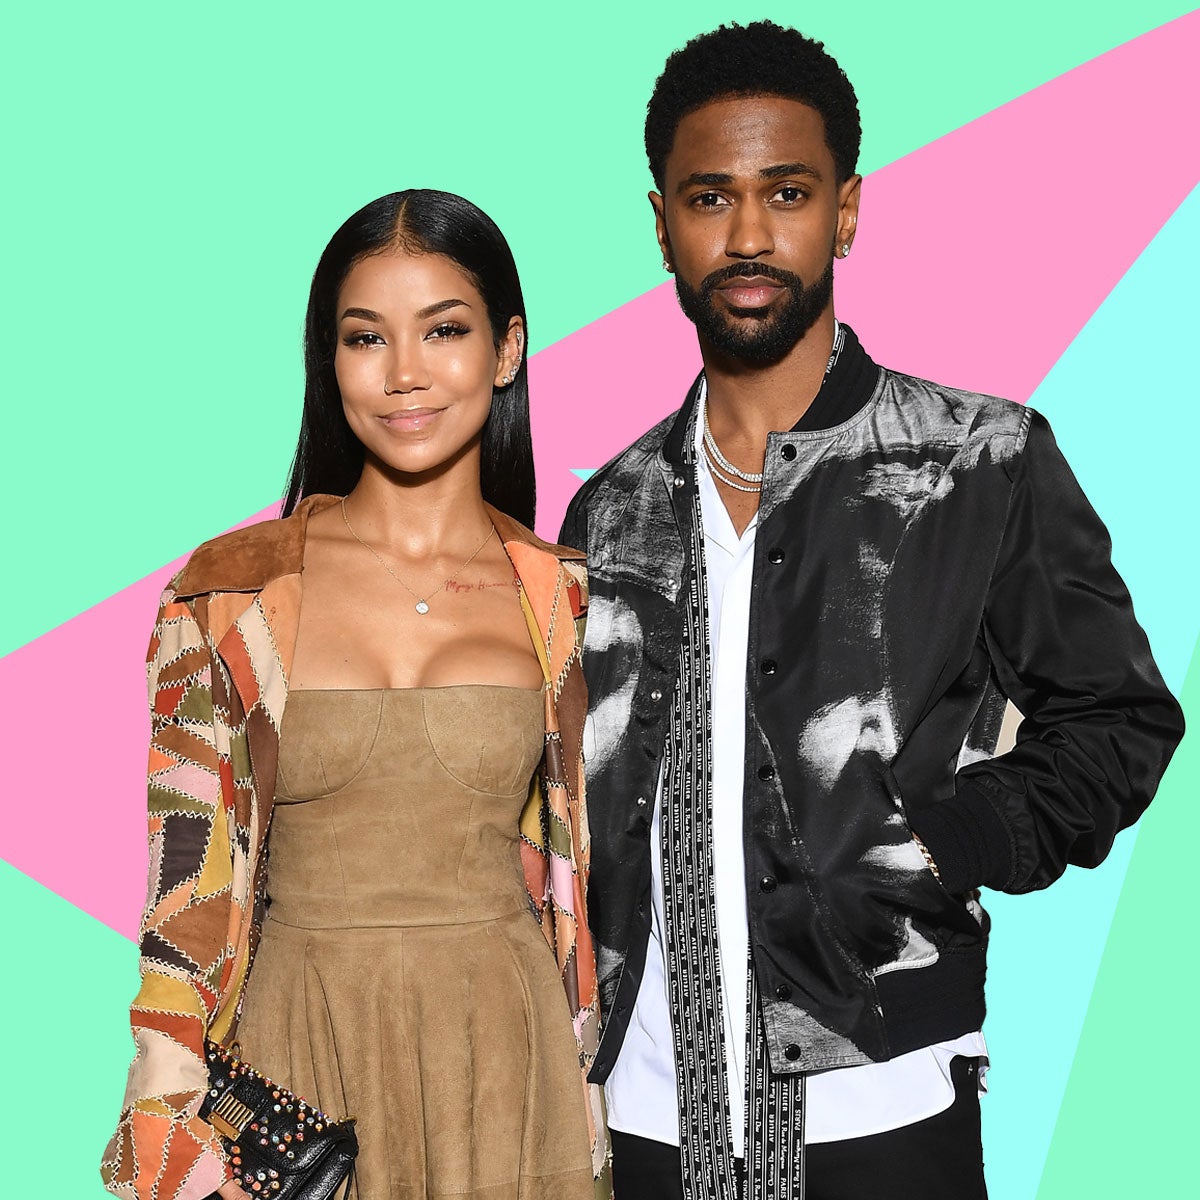 Jhené Aiko Says There's No Bad Blood With Ex-Boyfriend Big Sean